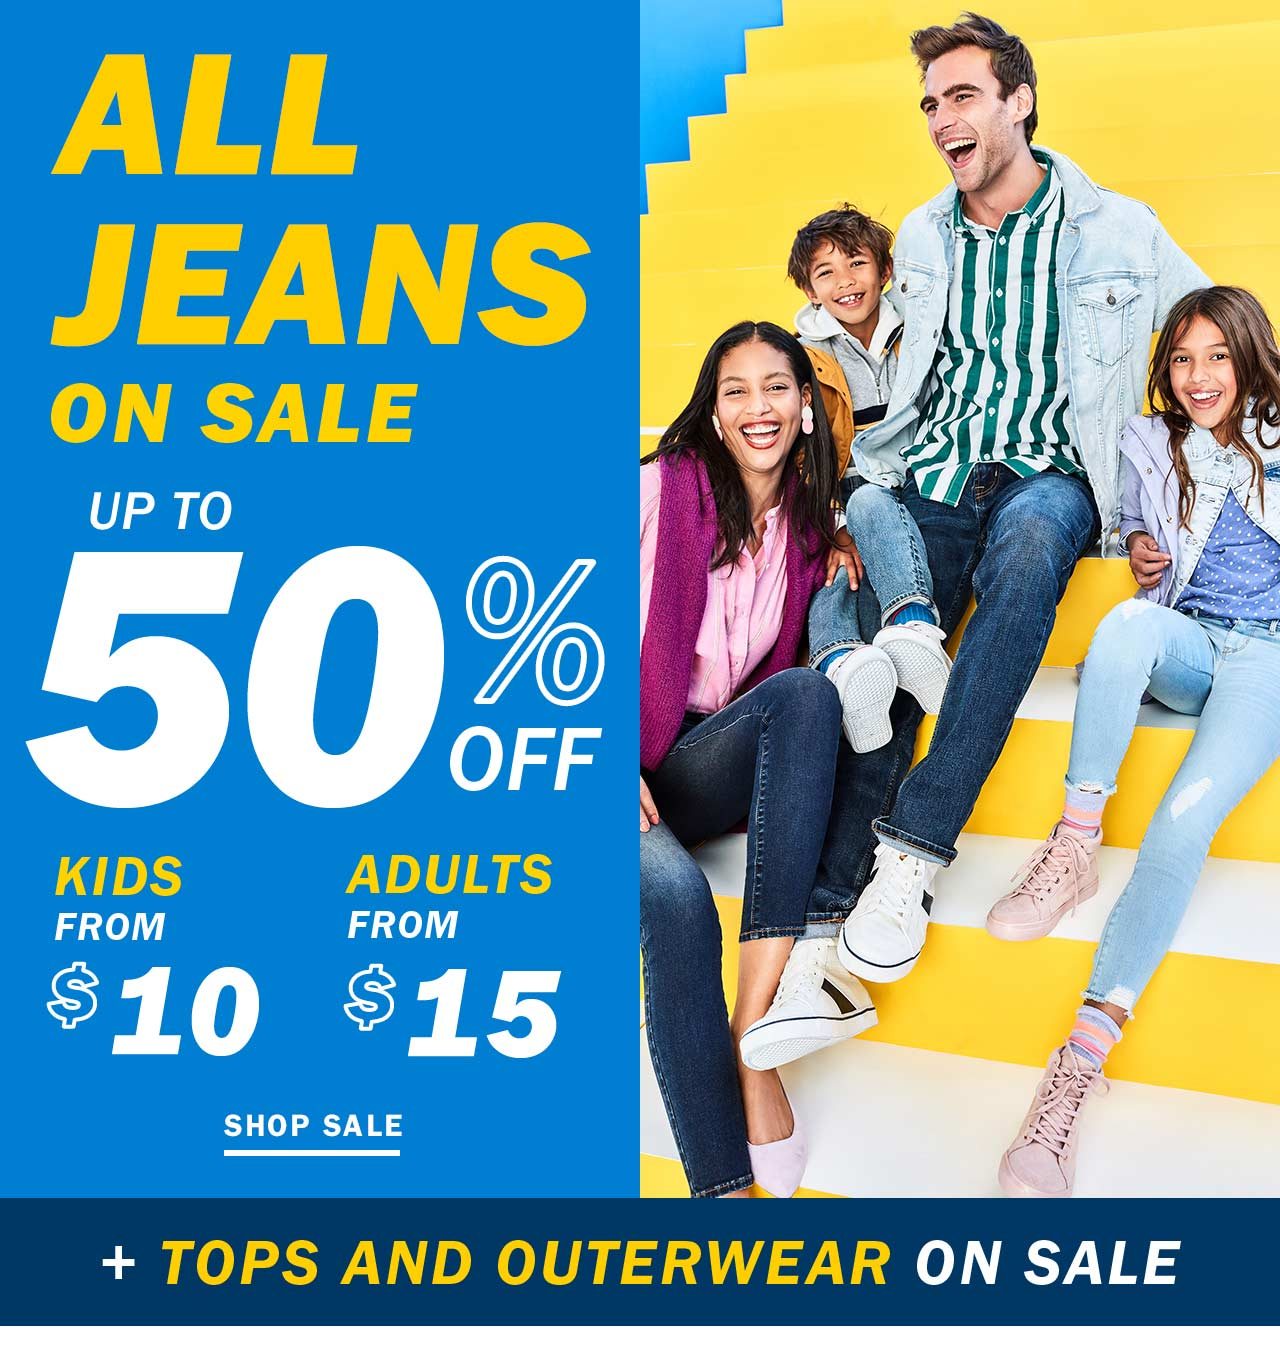 ALL JEANS ON SALE